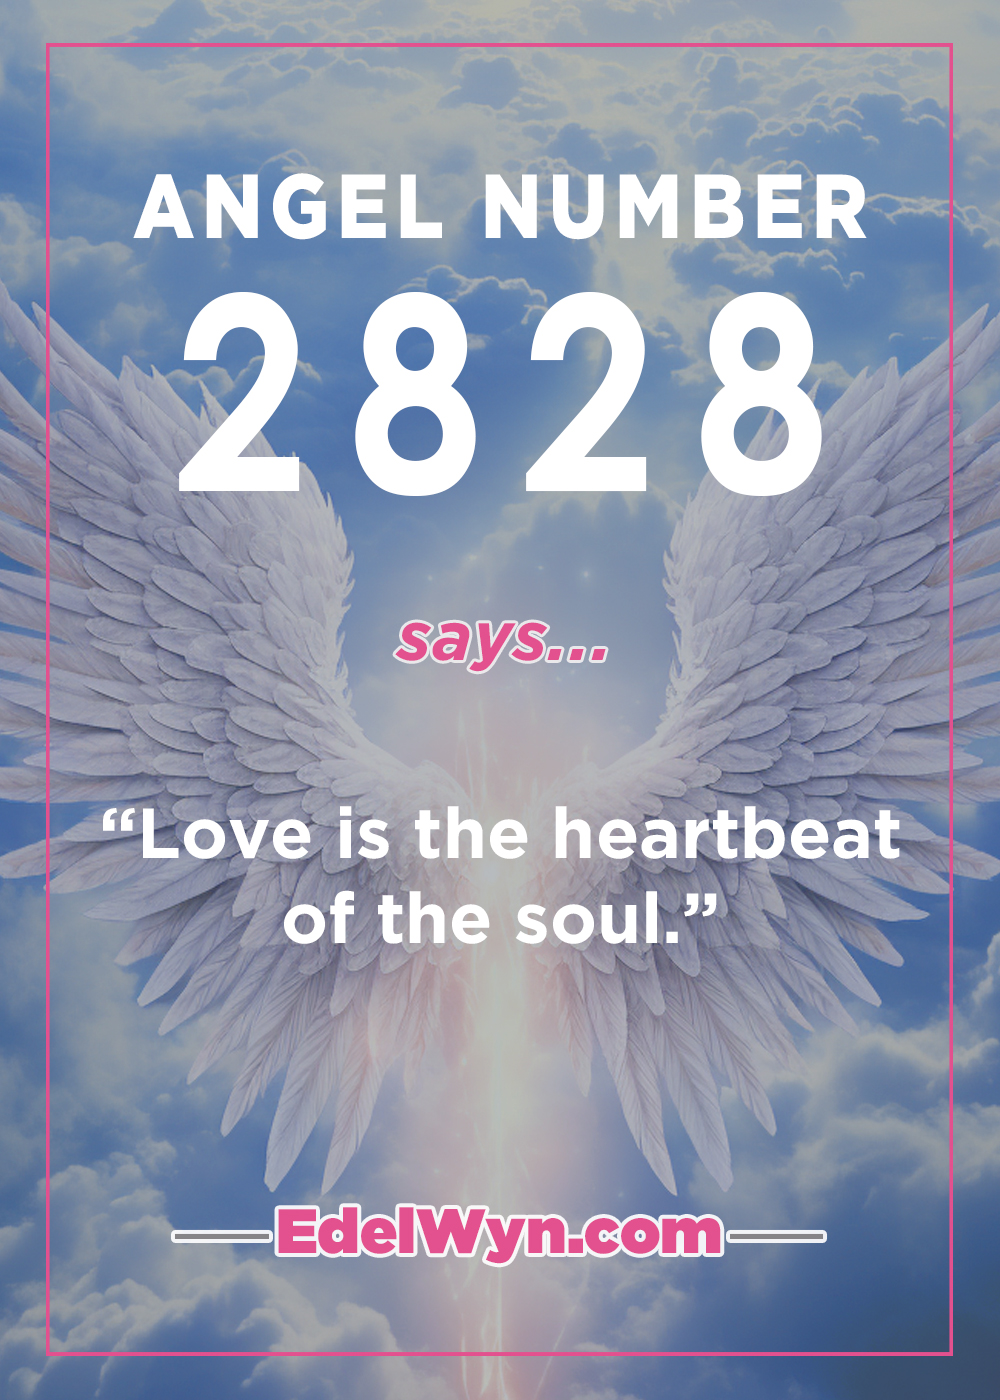 Few People Know These Facts About 2828 Angel Number